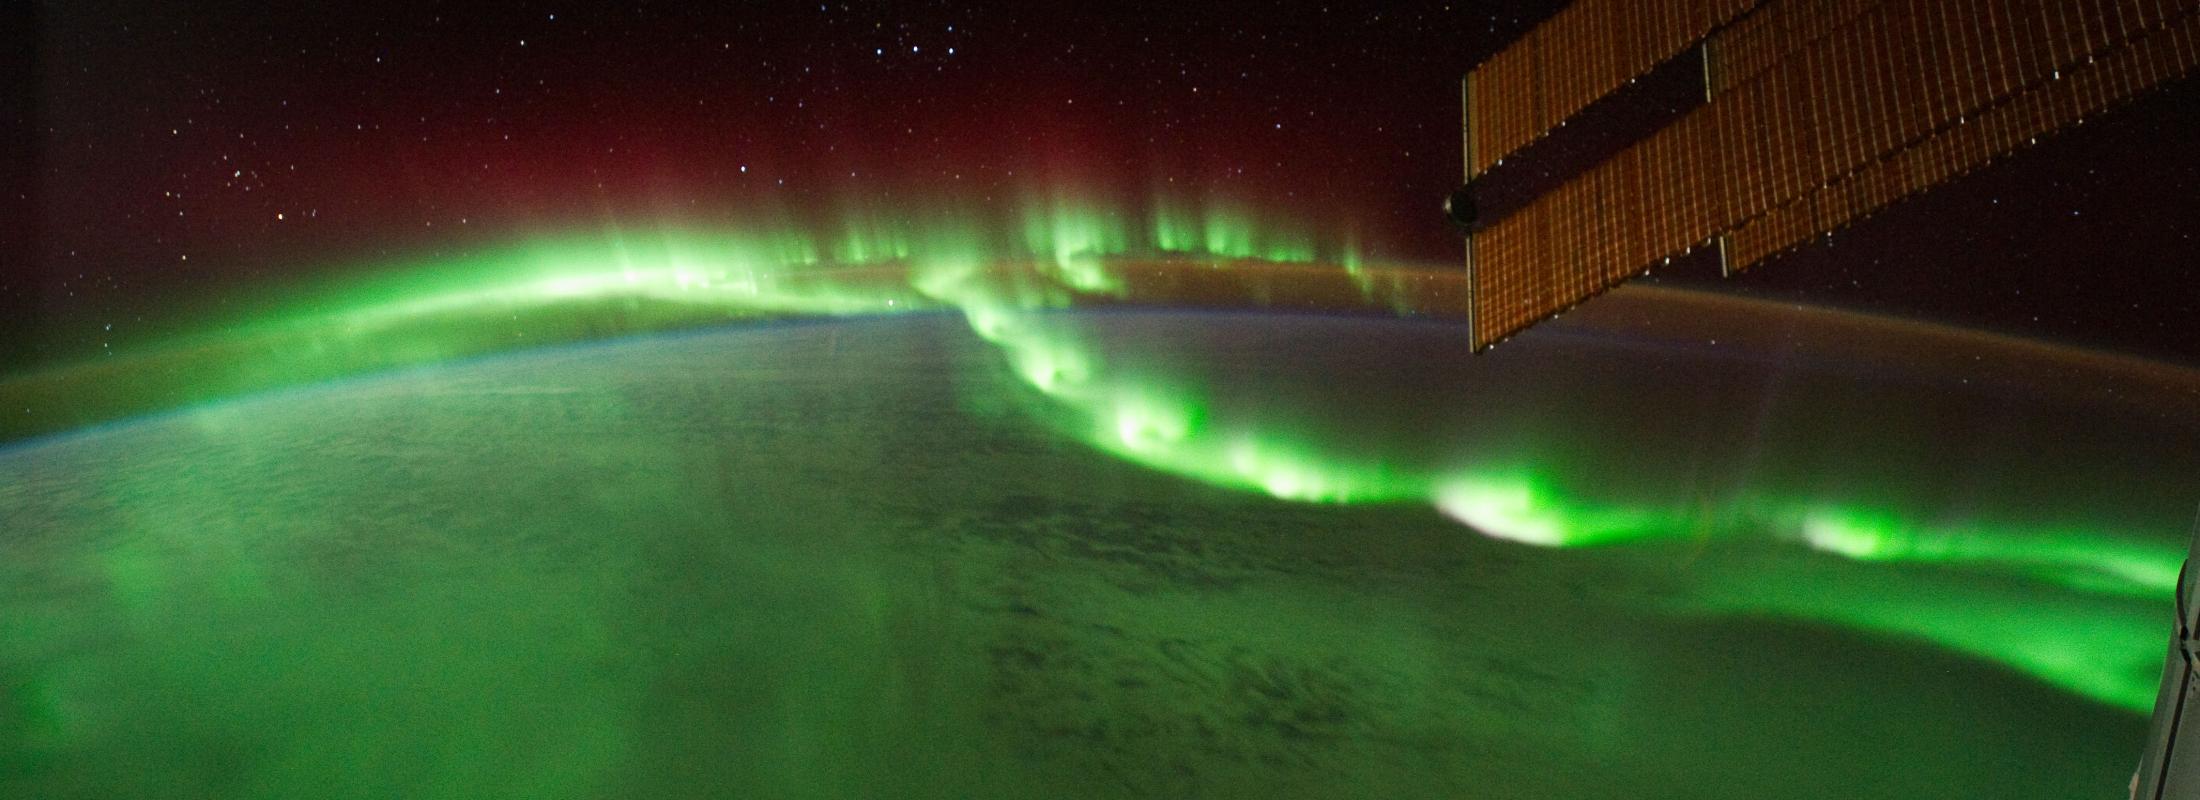 Aurora over the Earth from space